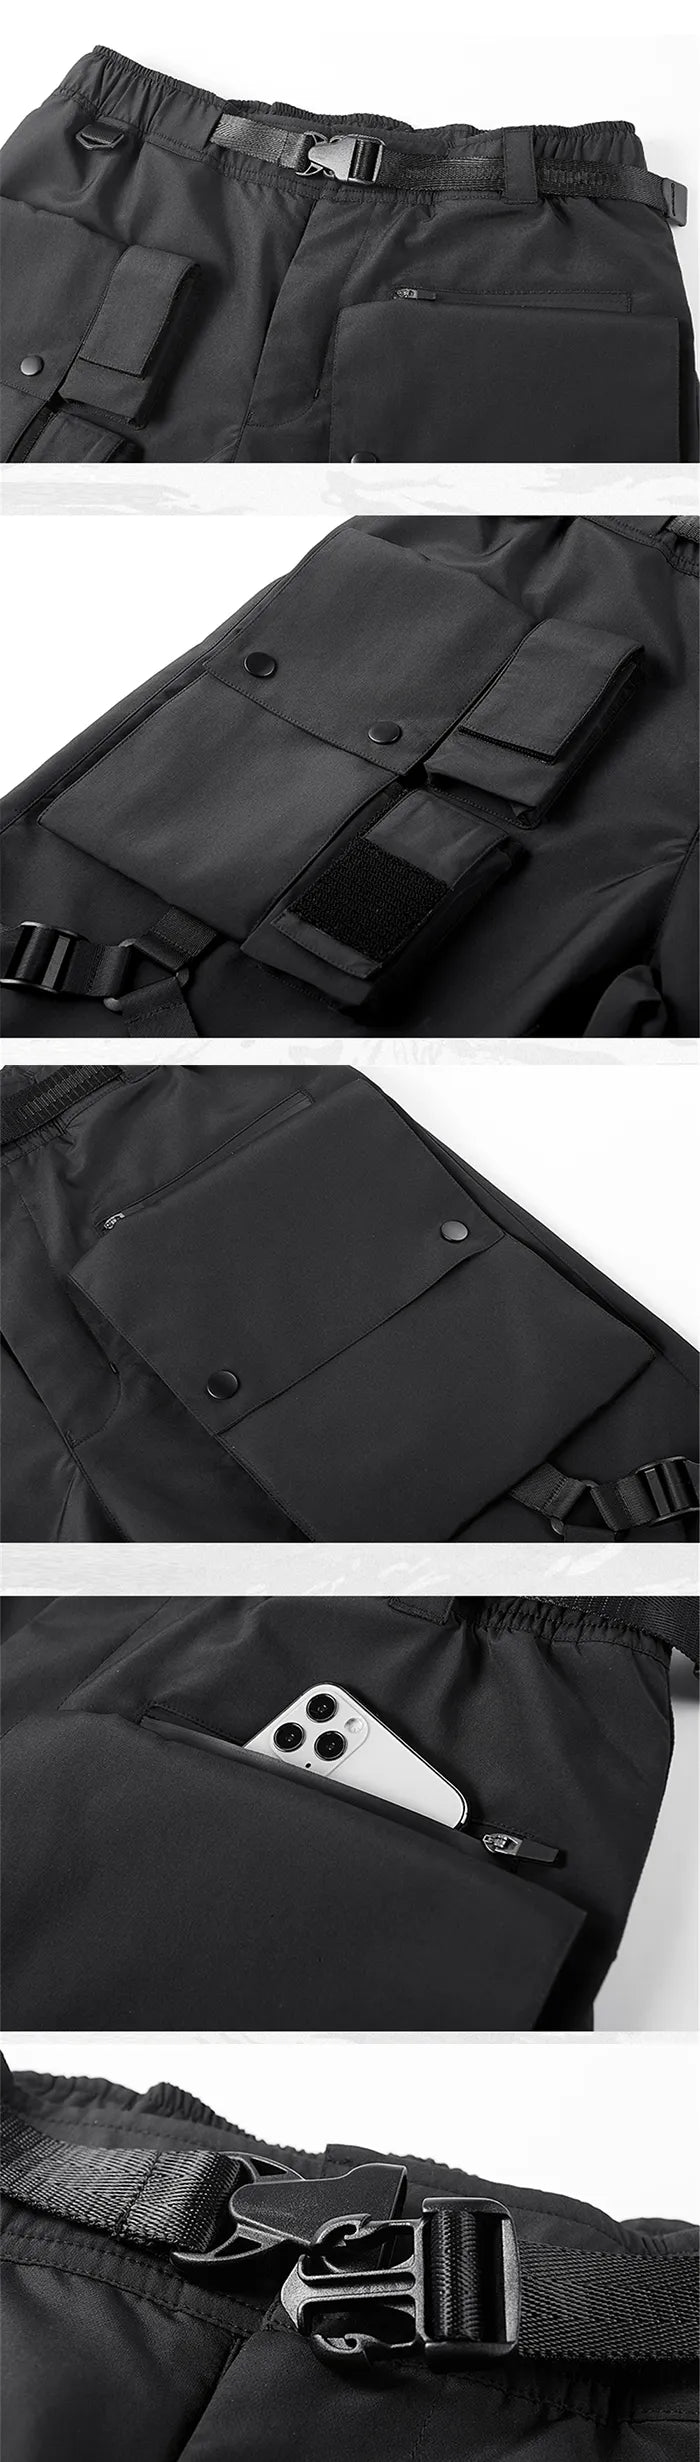 more details of the Men's tactical cargo shorts  "Chiba"